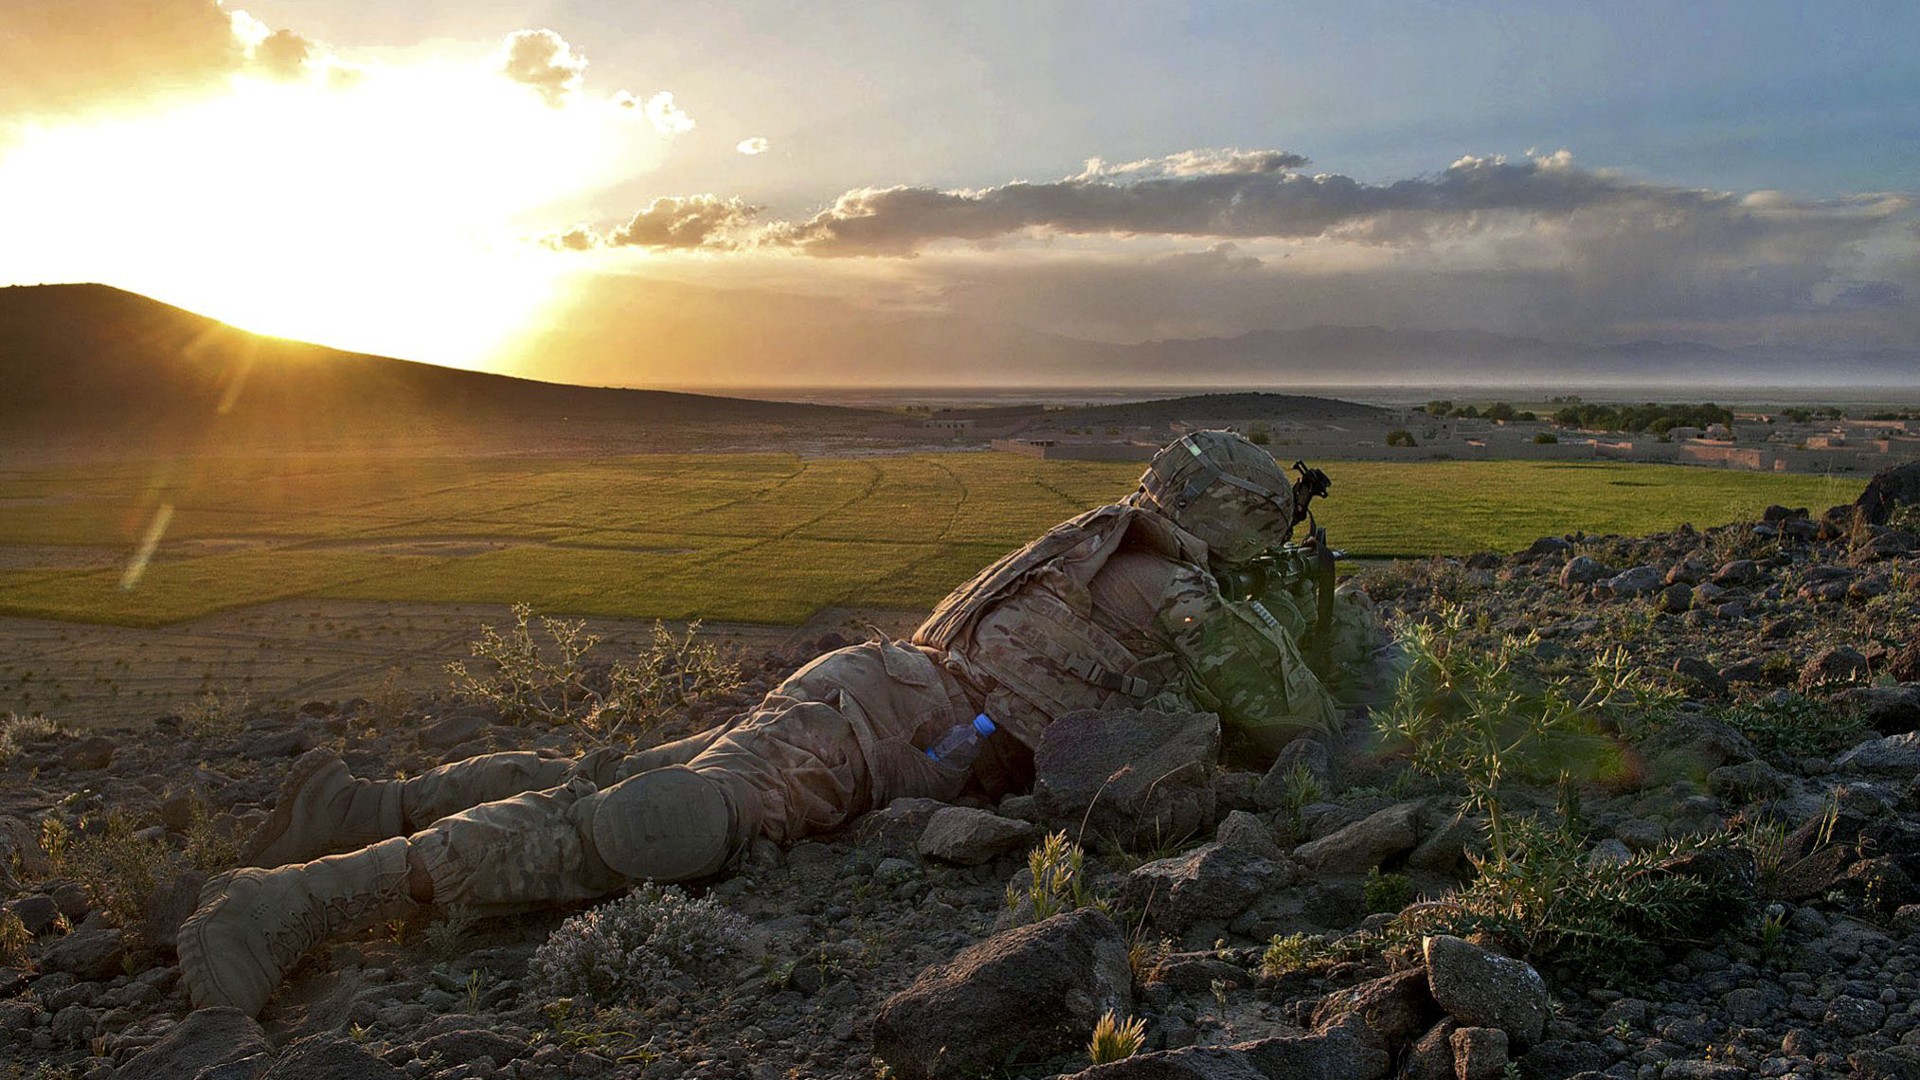 General 1920x1080 military soldier Afghanistan War in Afghanistan United States Army sunset sunlight